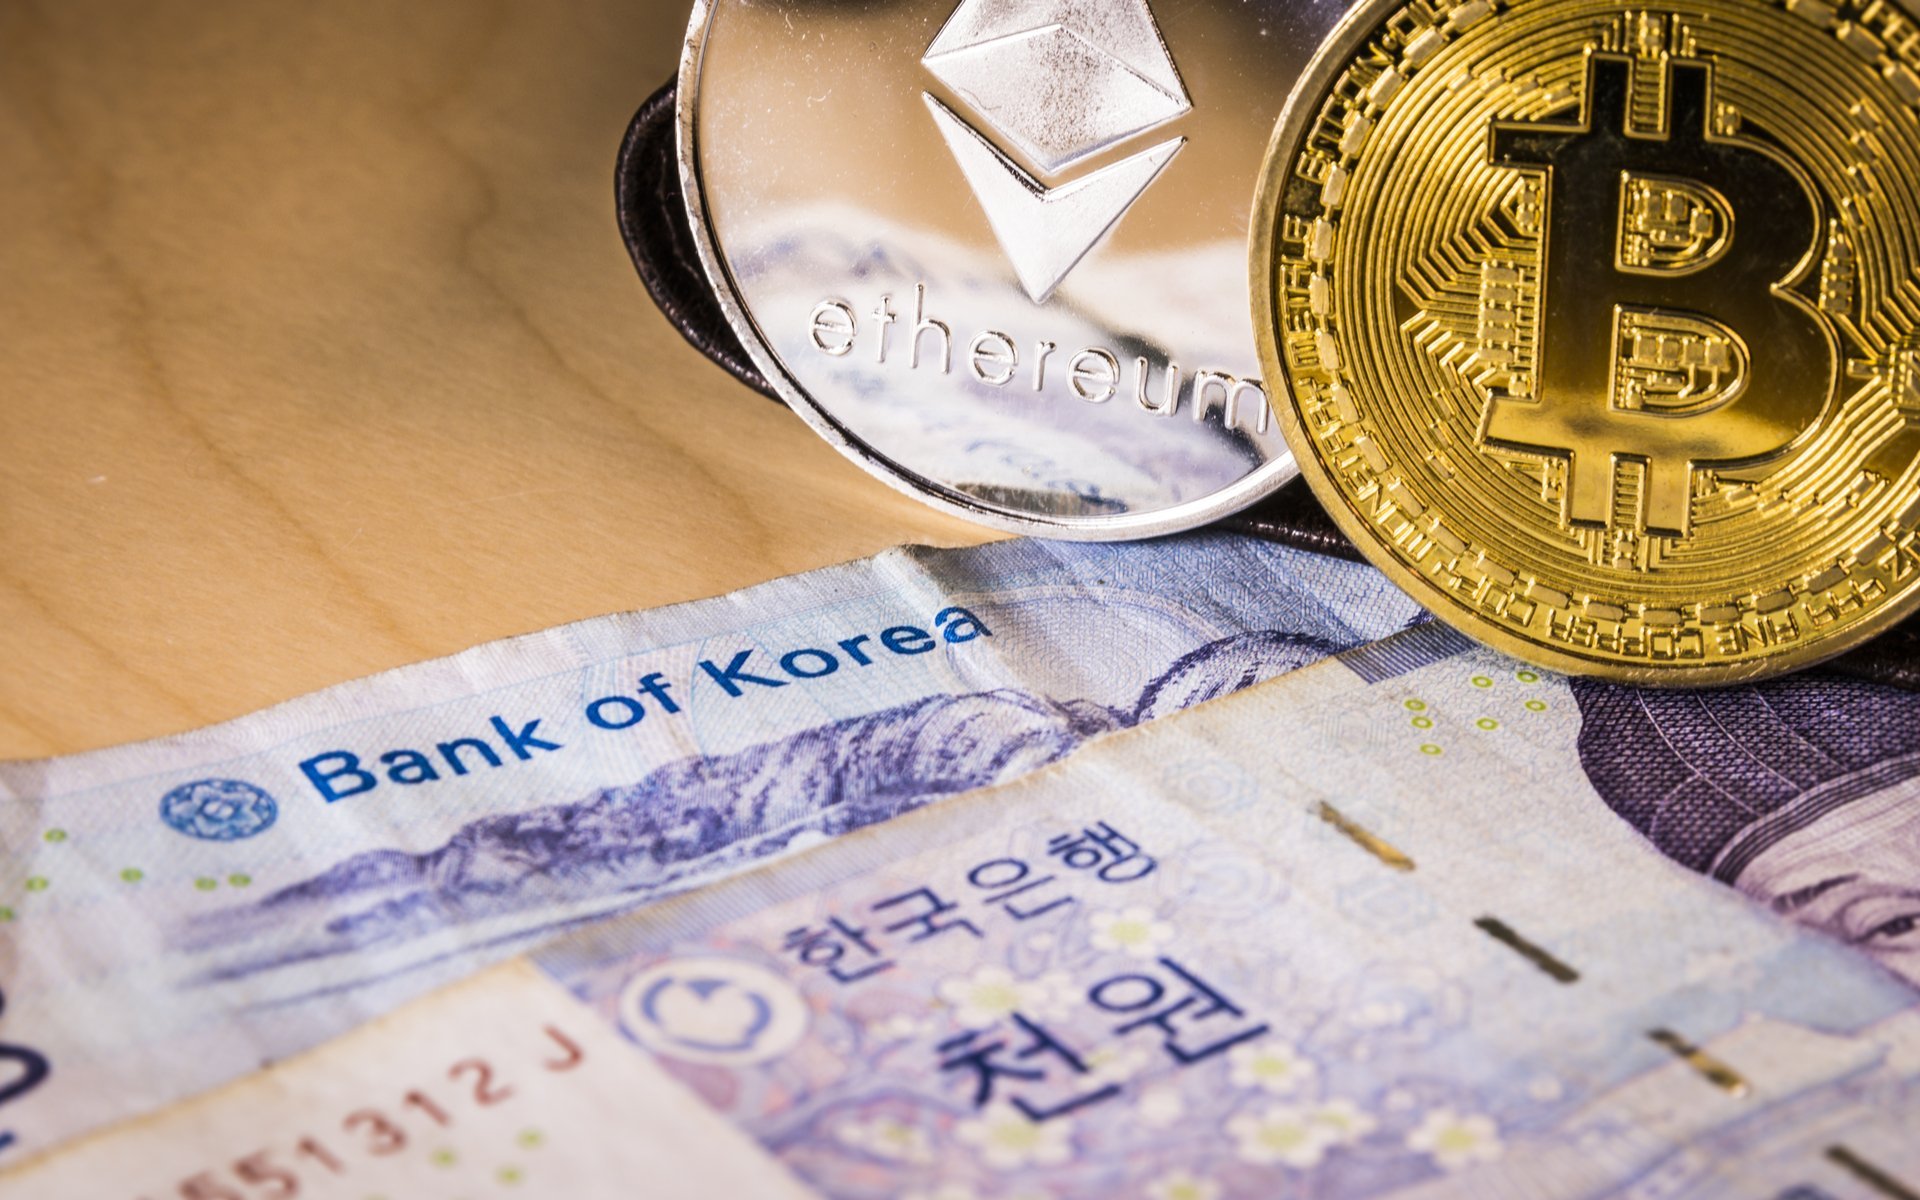 Bank of Korea Not Yet Ready for a Central Bank Digital Currency